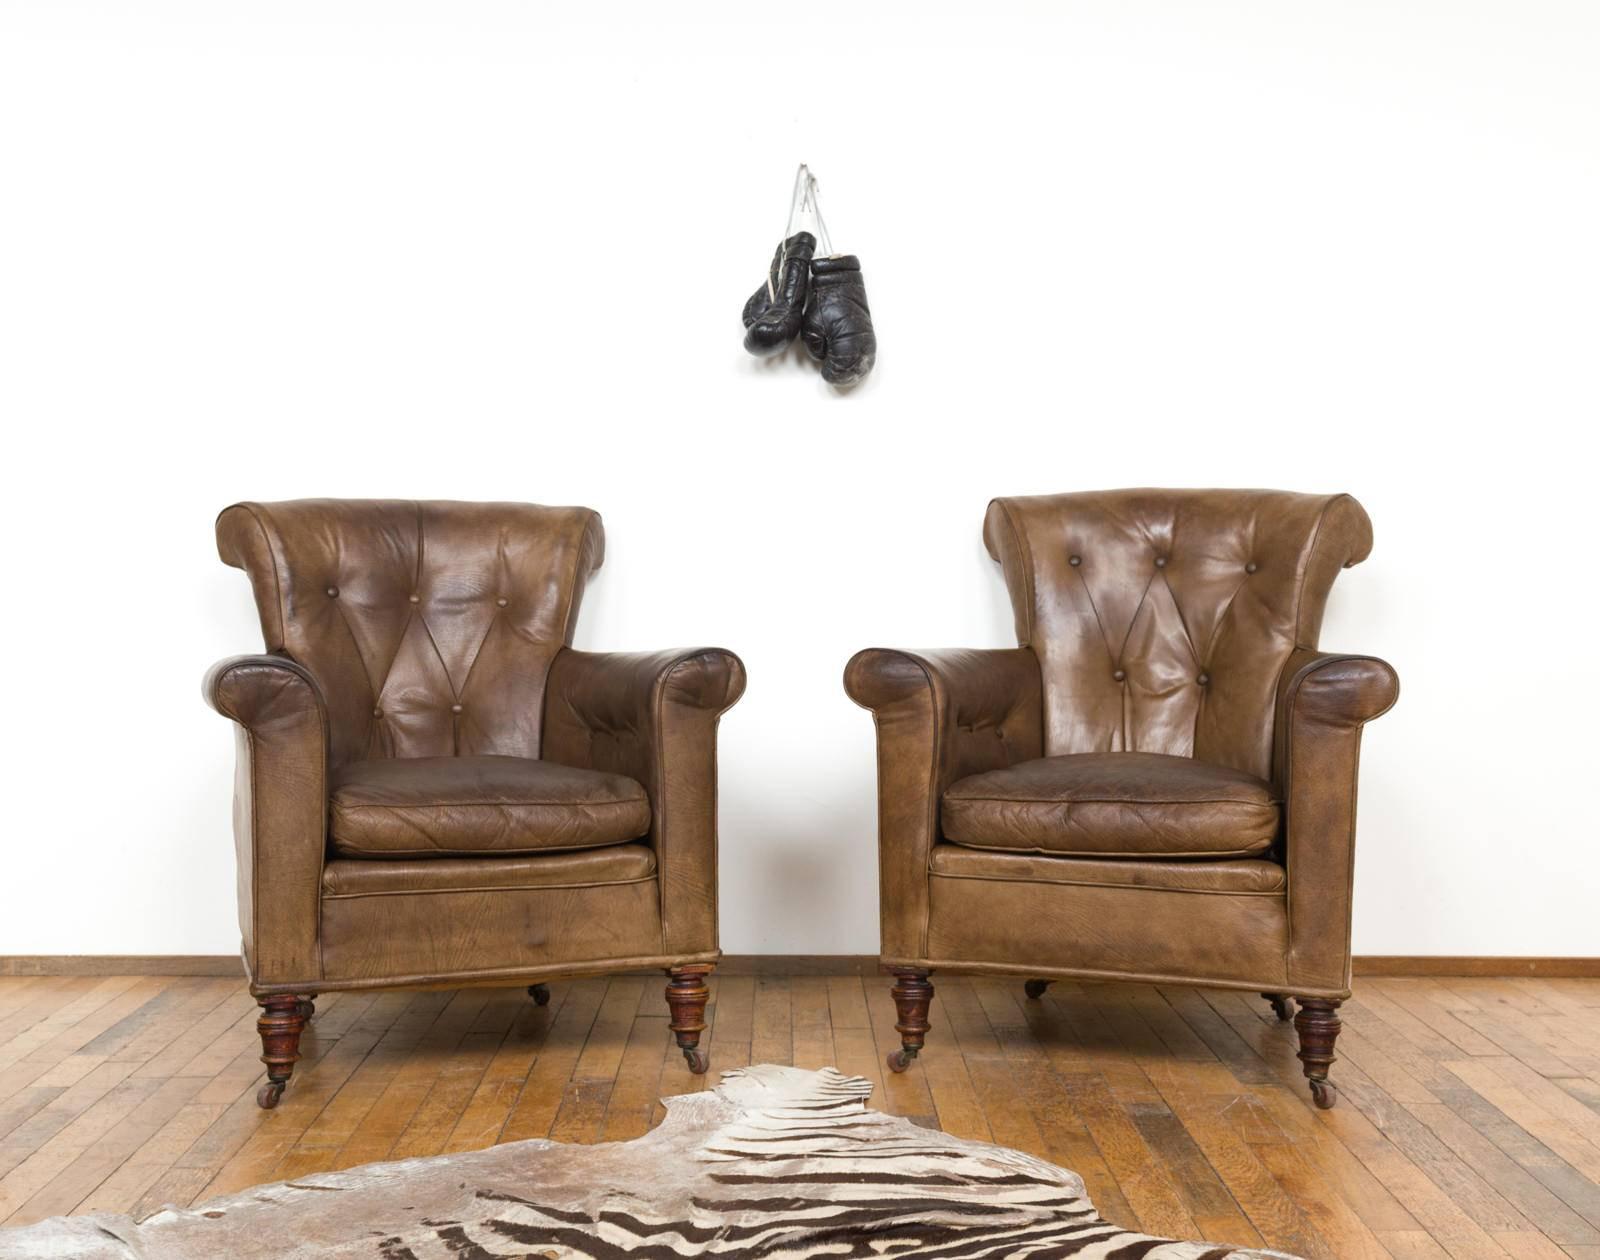 Set containing two club chairs dating from the beginning of the 20th century. The set has been reupholstered somewhere late 20th century. The chairs are filled up with horsehair and are very comfortable. The caramel brown leather has a beautiful